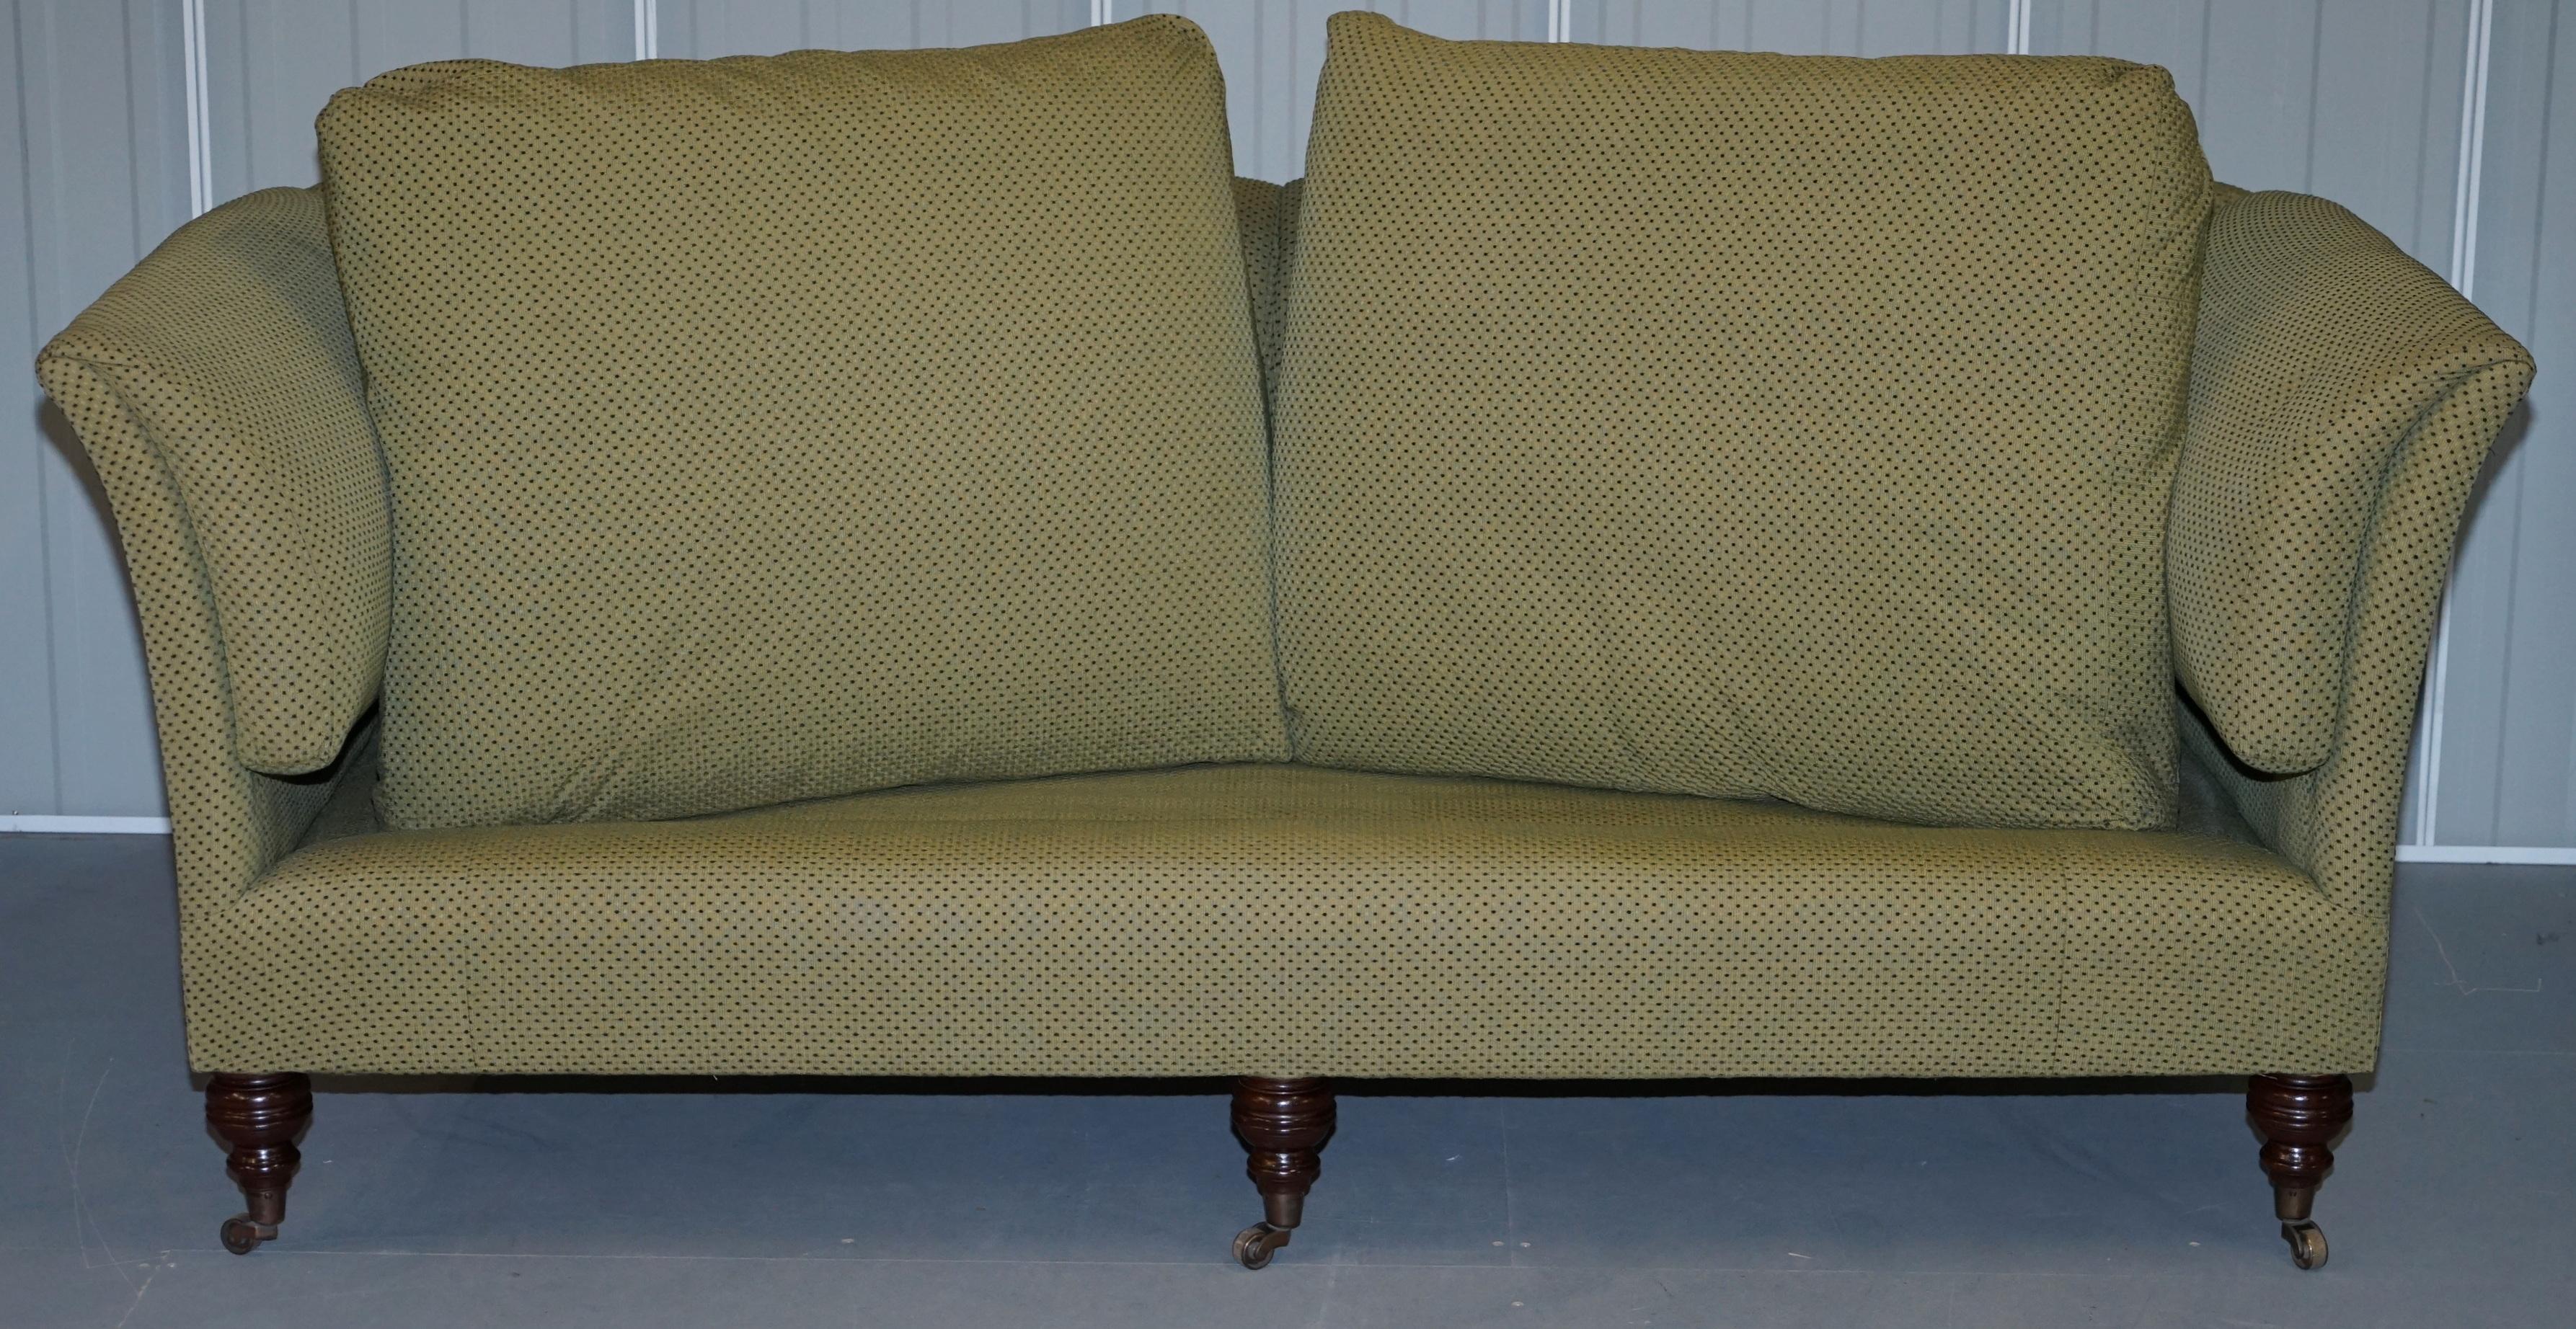 Stunning Beaumont & Fletcher Pompadour Sofa Feather Filled Cushions 10